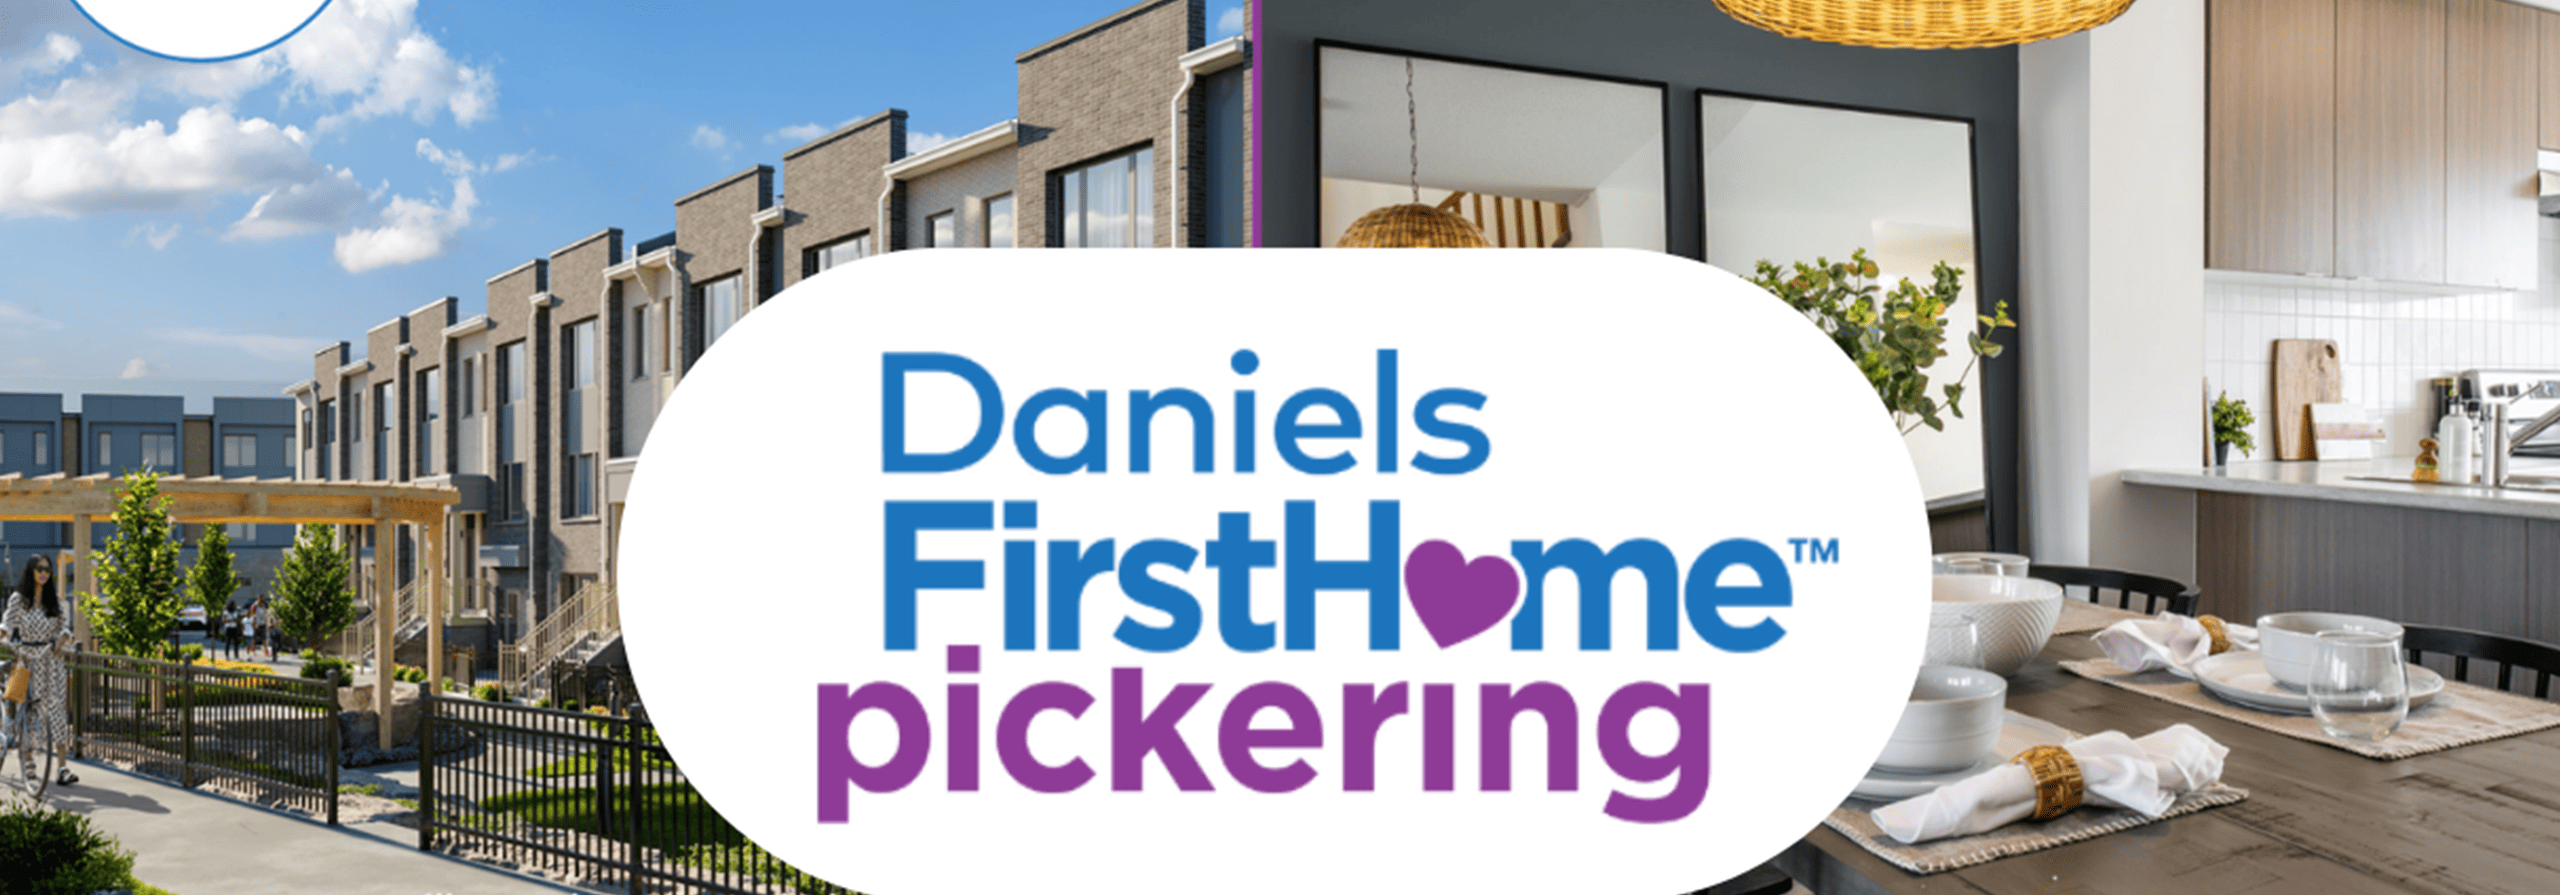 Daniels FirstHome Pickering logo